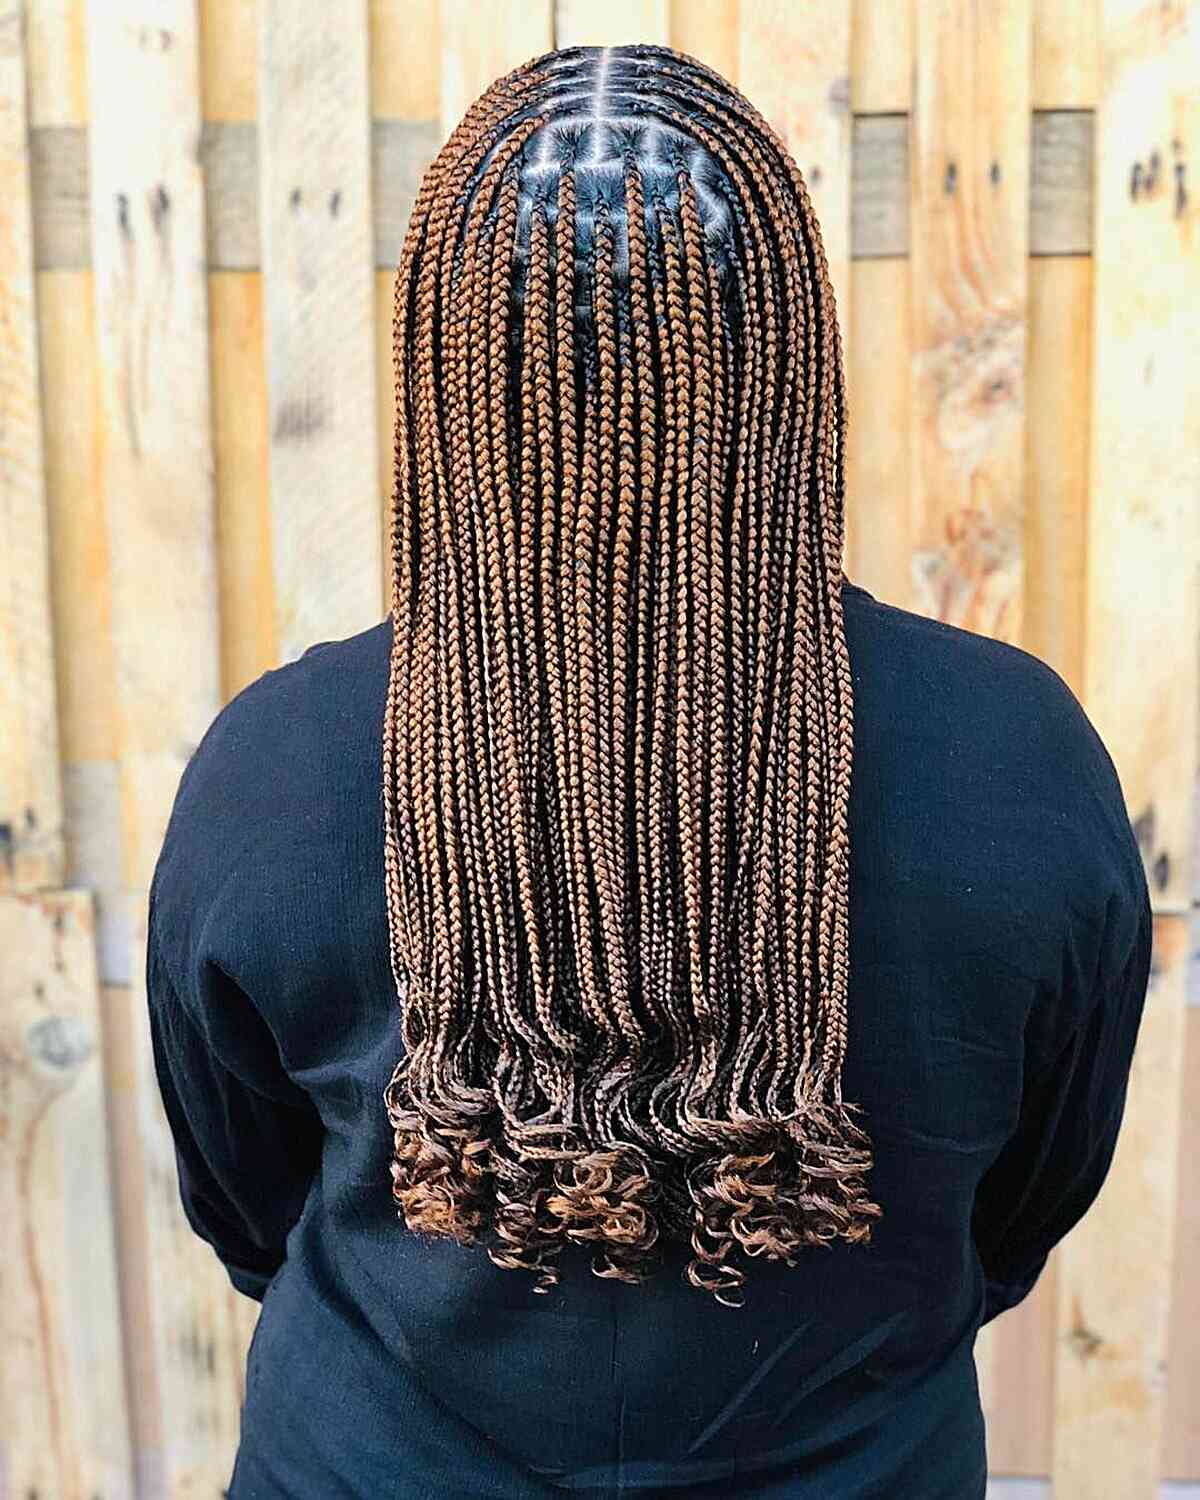 Small No-Knots Light Brown Box Braids with Curled Ends